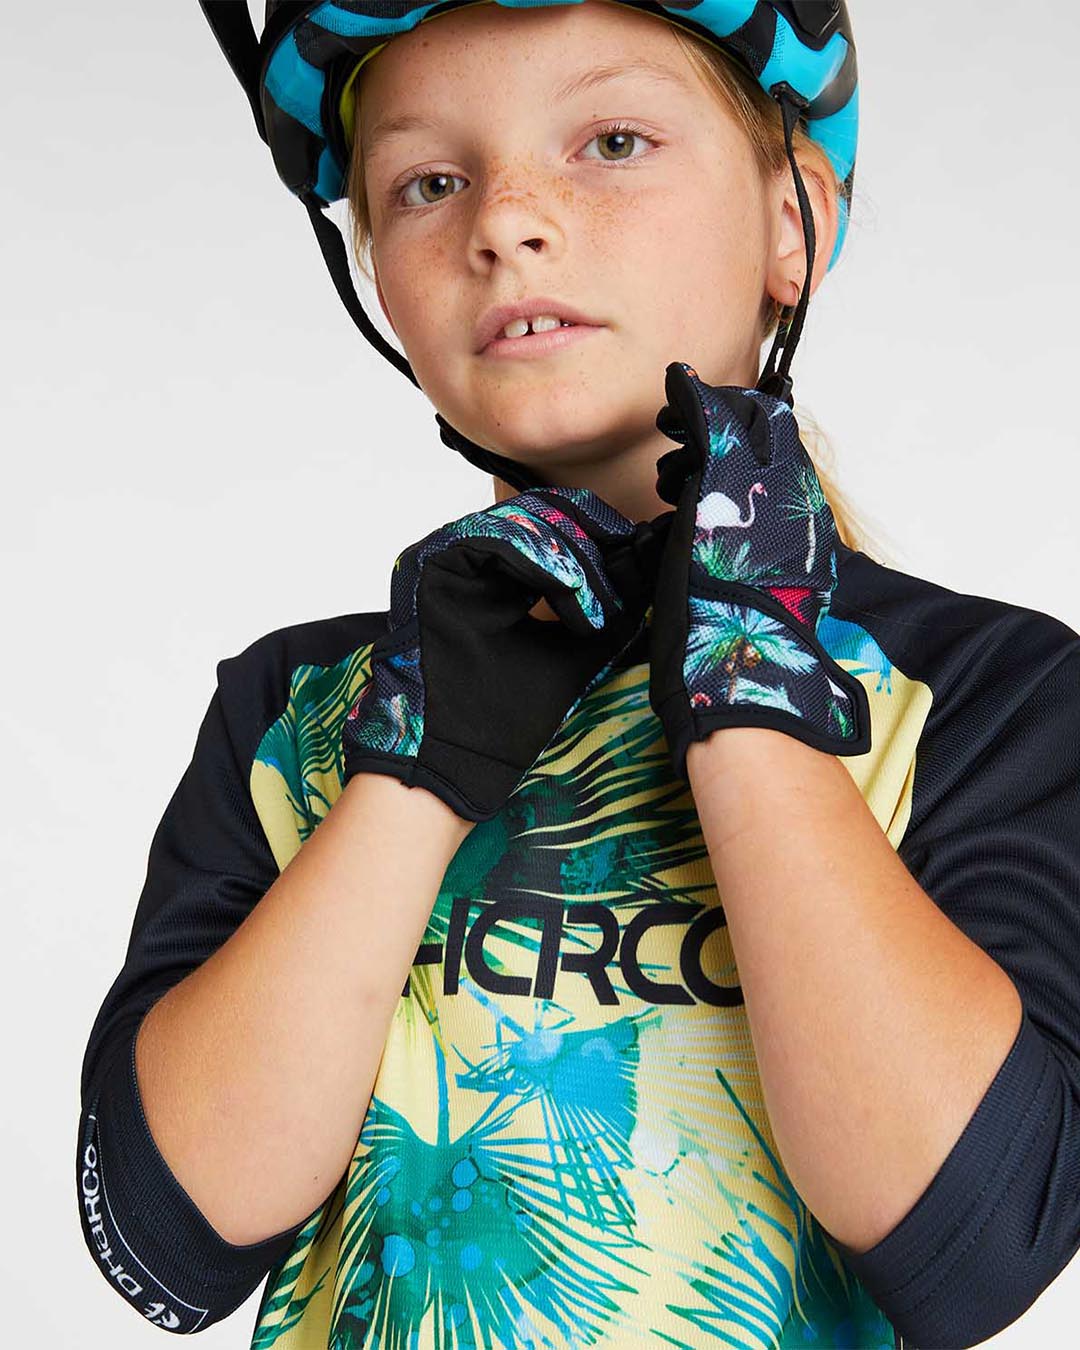 Youth Gloves | Party Shirt